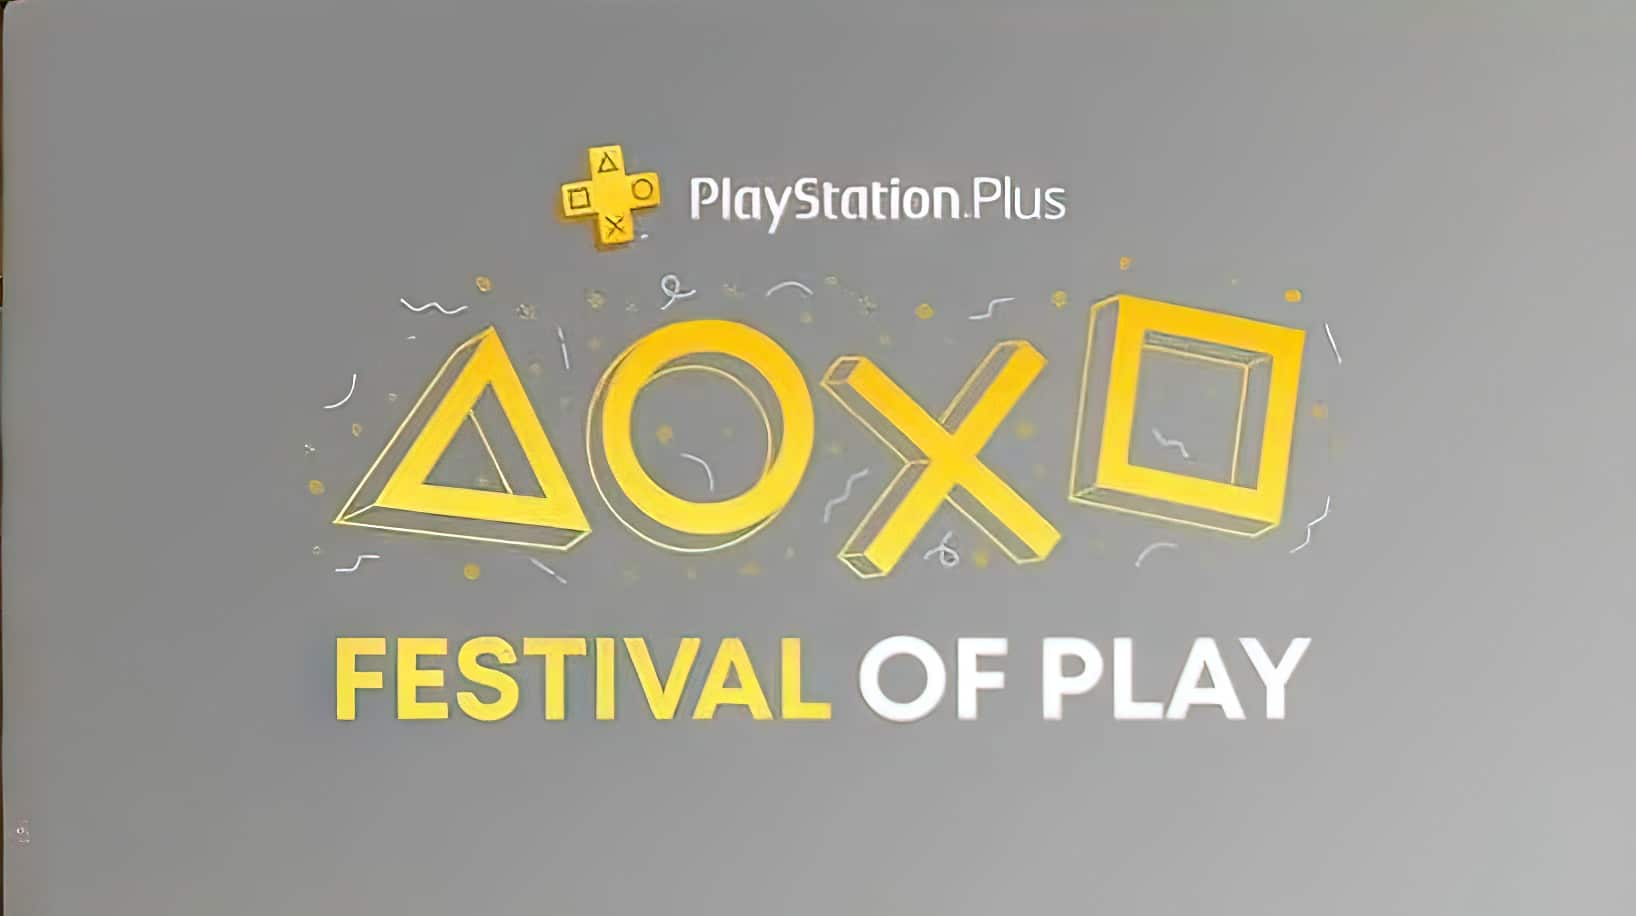 PlayStation plus festival of play